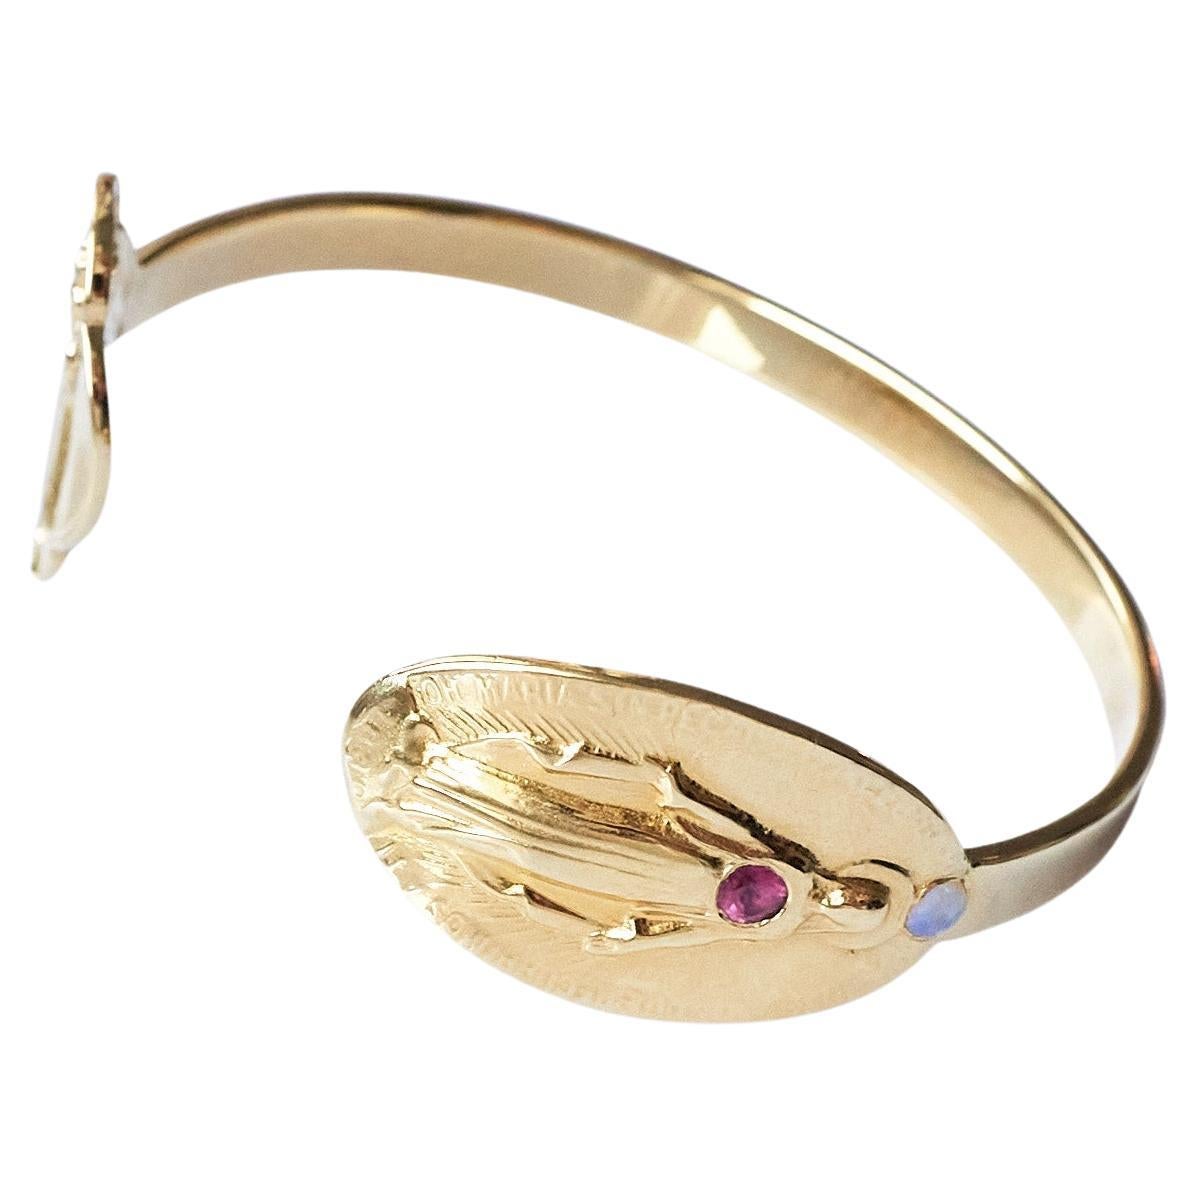 Tourmaline Opal Virgin Mary Bangle Bracelet Cuff Gold Plated Spiritual Religious For Sale